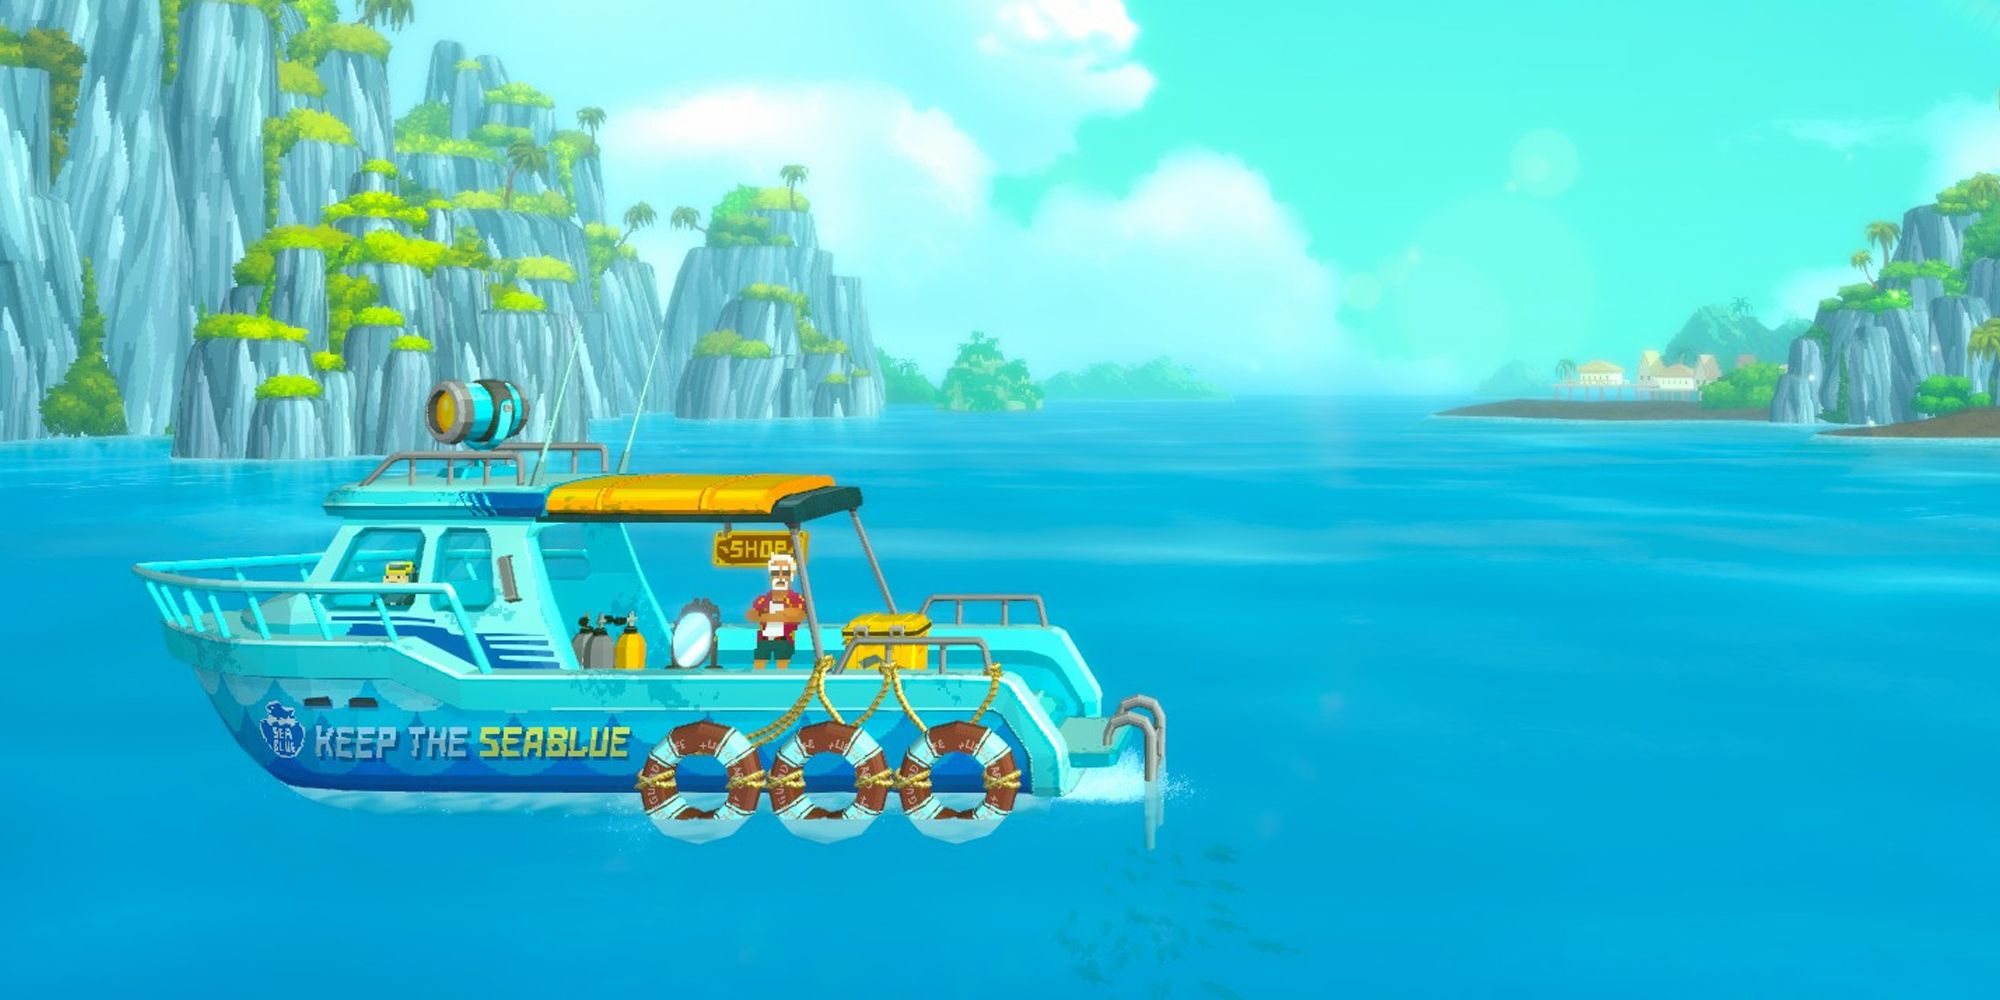 The boat in Dave the Diver with the Sea Blue skin.